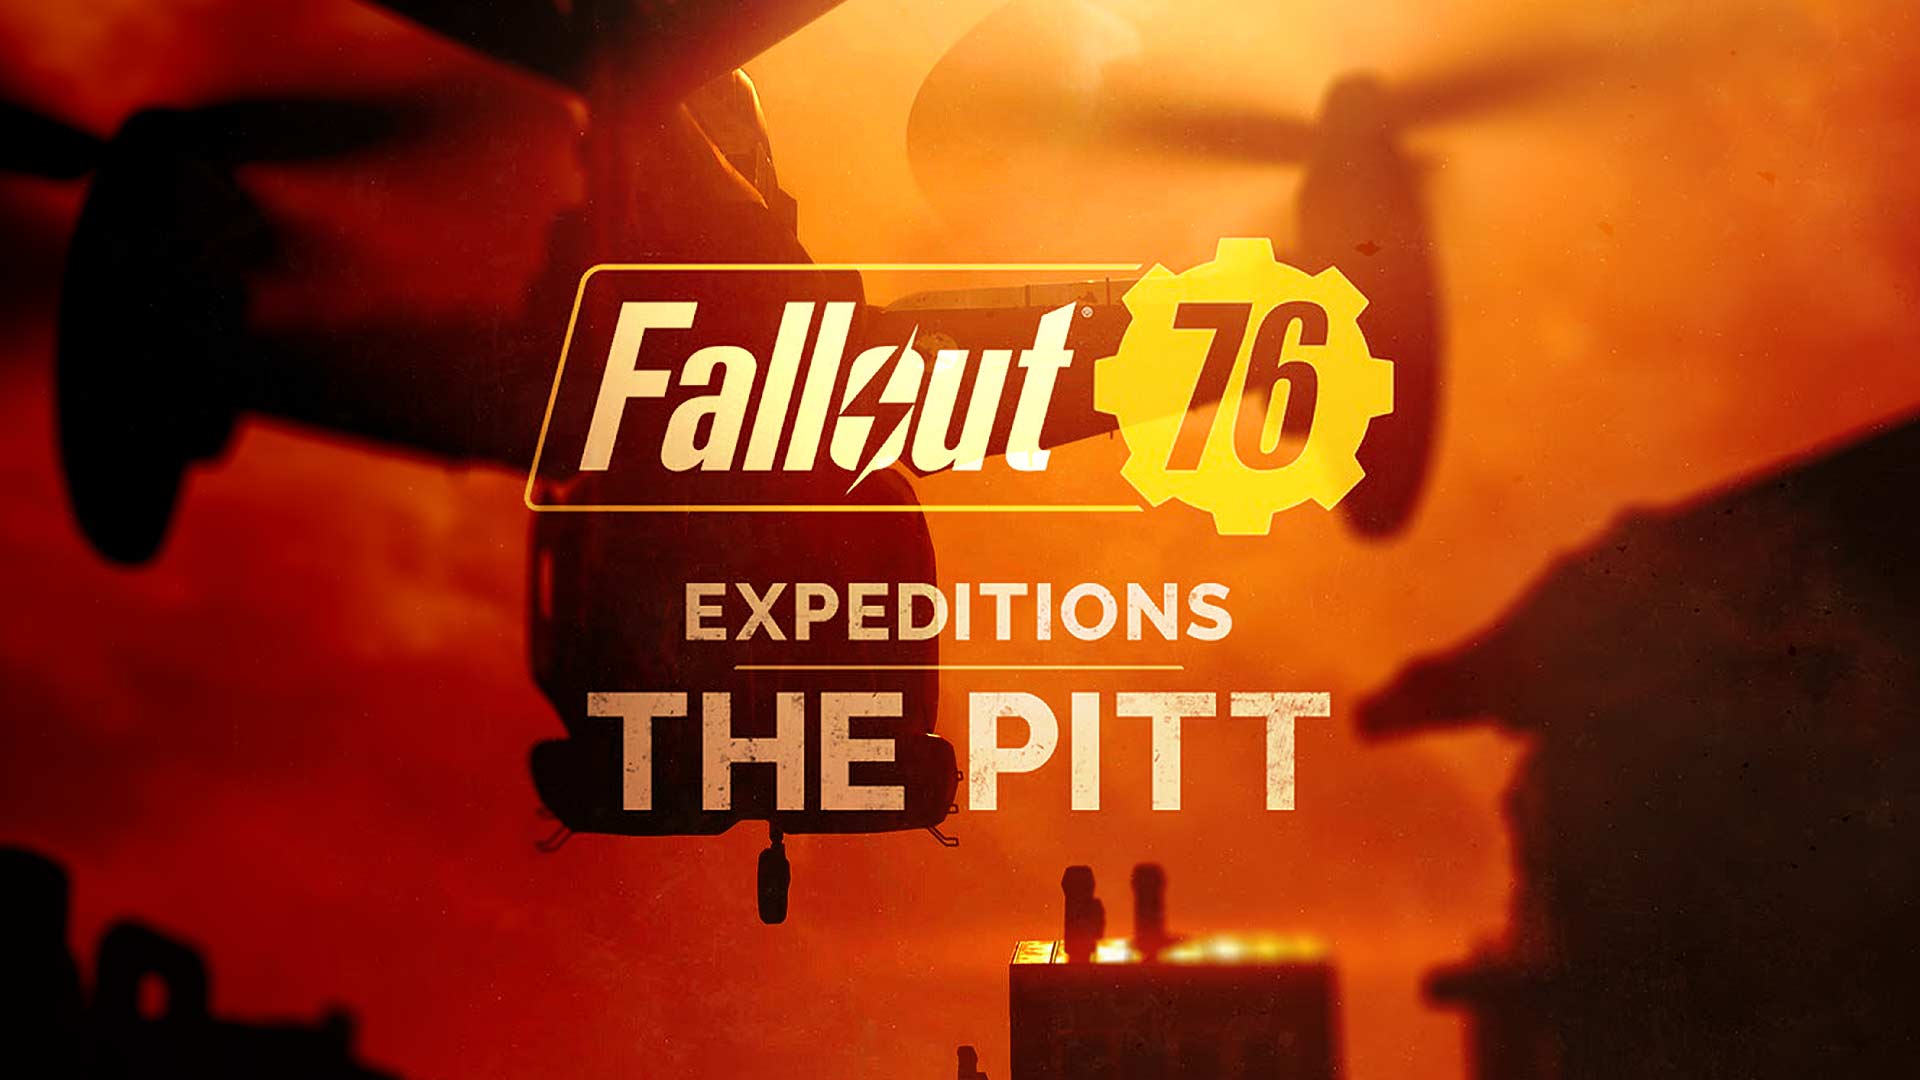 Fallout 76 - Expeditions: The Pitt